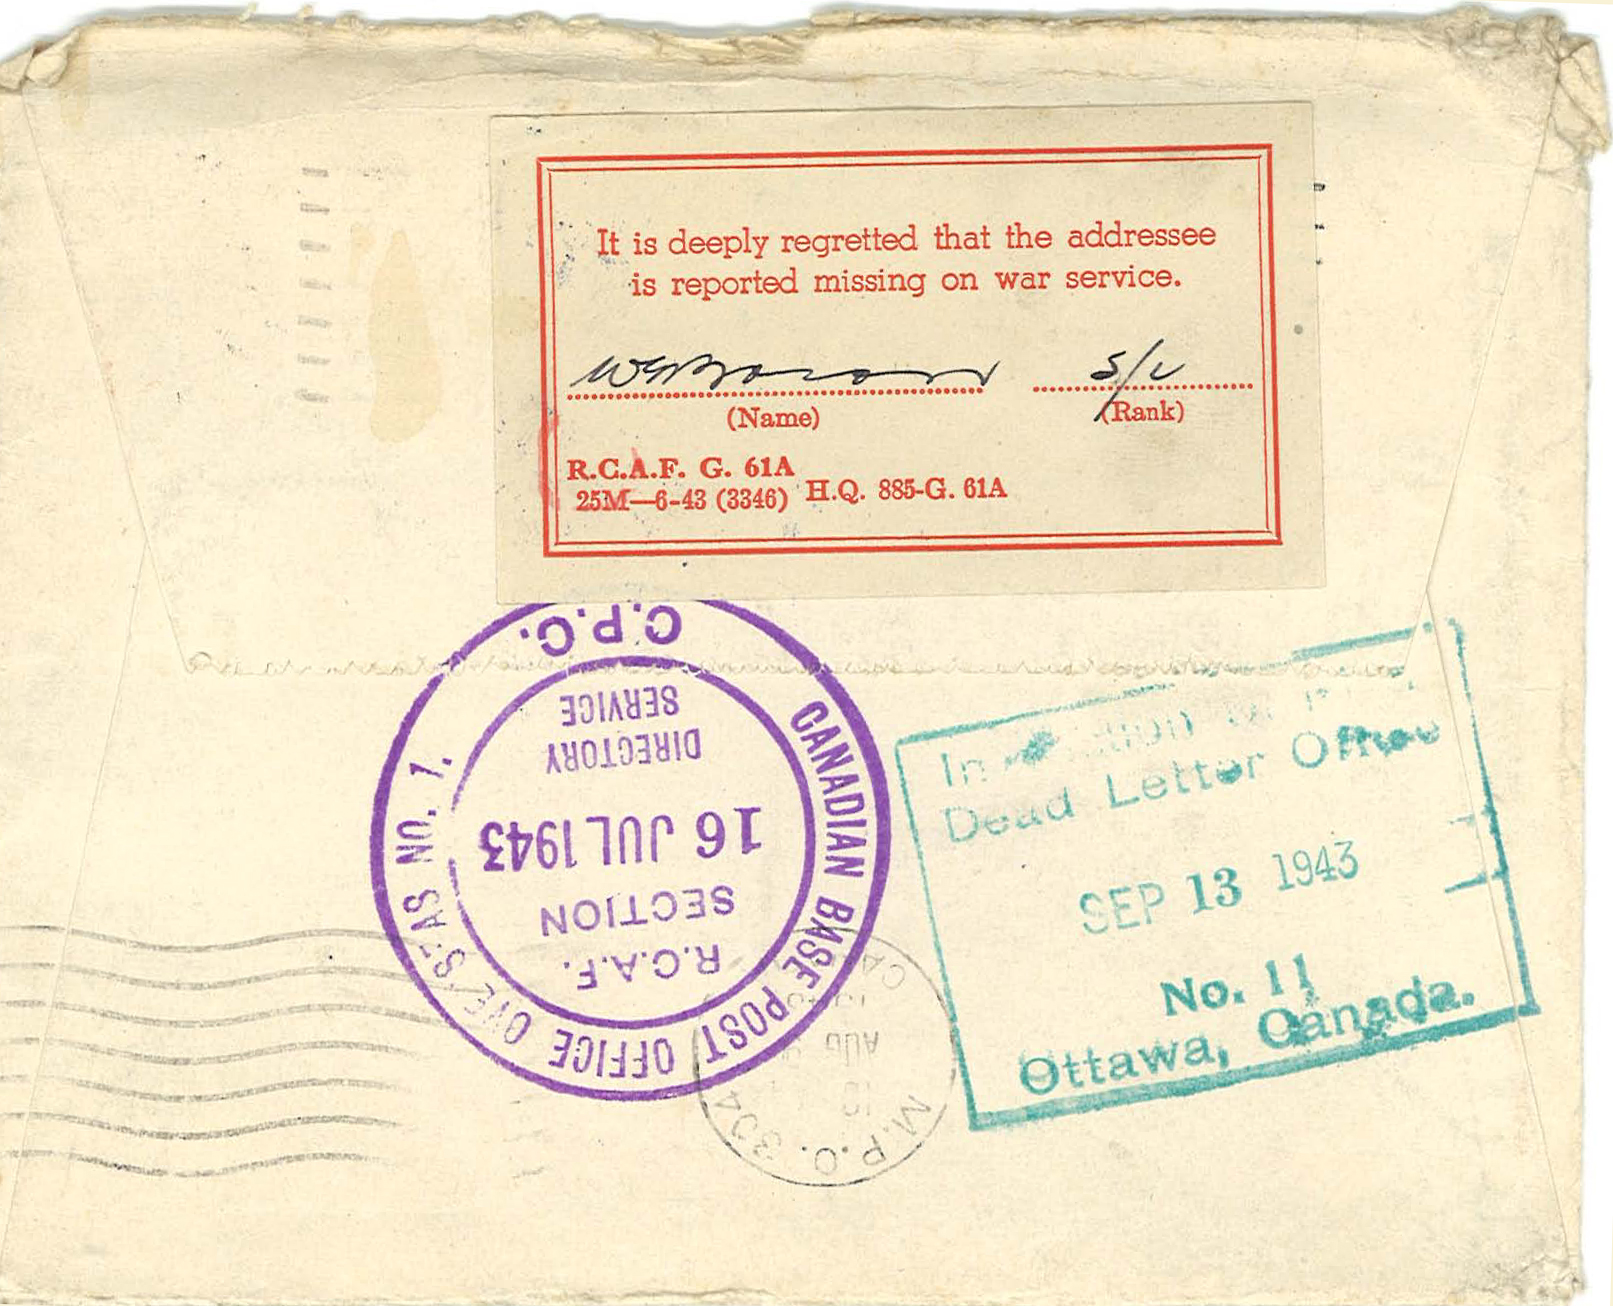 Envelope of a letter sent by Mrs. Fannie Lennox to her son John Watt Lennox, stationed overseas as a fighter pilot. The letter was dated May 3, 1943. On the night of May 4/5, 1943 during his seventh sortie in a Halifax bomber with other allied bombers targeting Dortmund in the Ruhr valley, Lennox and his crew were shot down along the German-Dutch border. John Lennox and his air gunner, Bernard Moody were killed, but the remaining crew survived. Lennox was one month short of his twenty-third birthday.